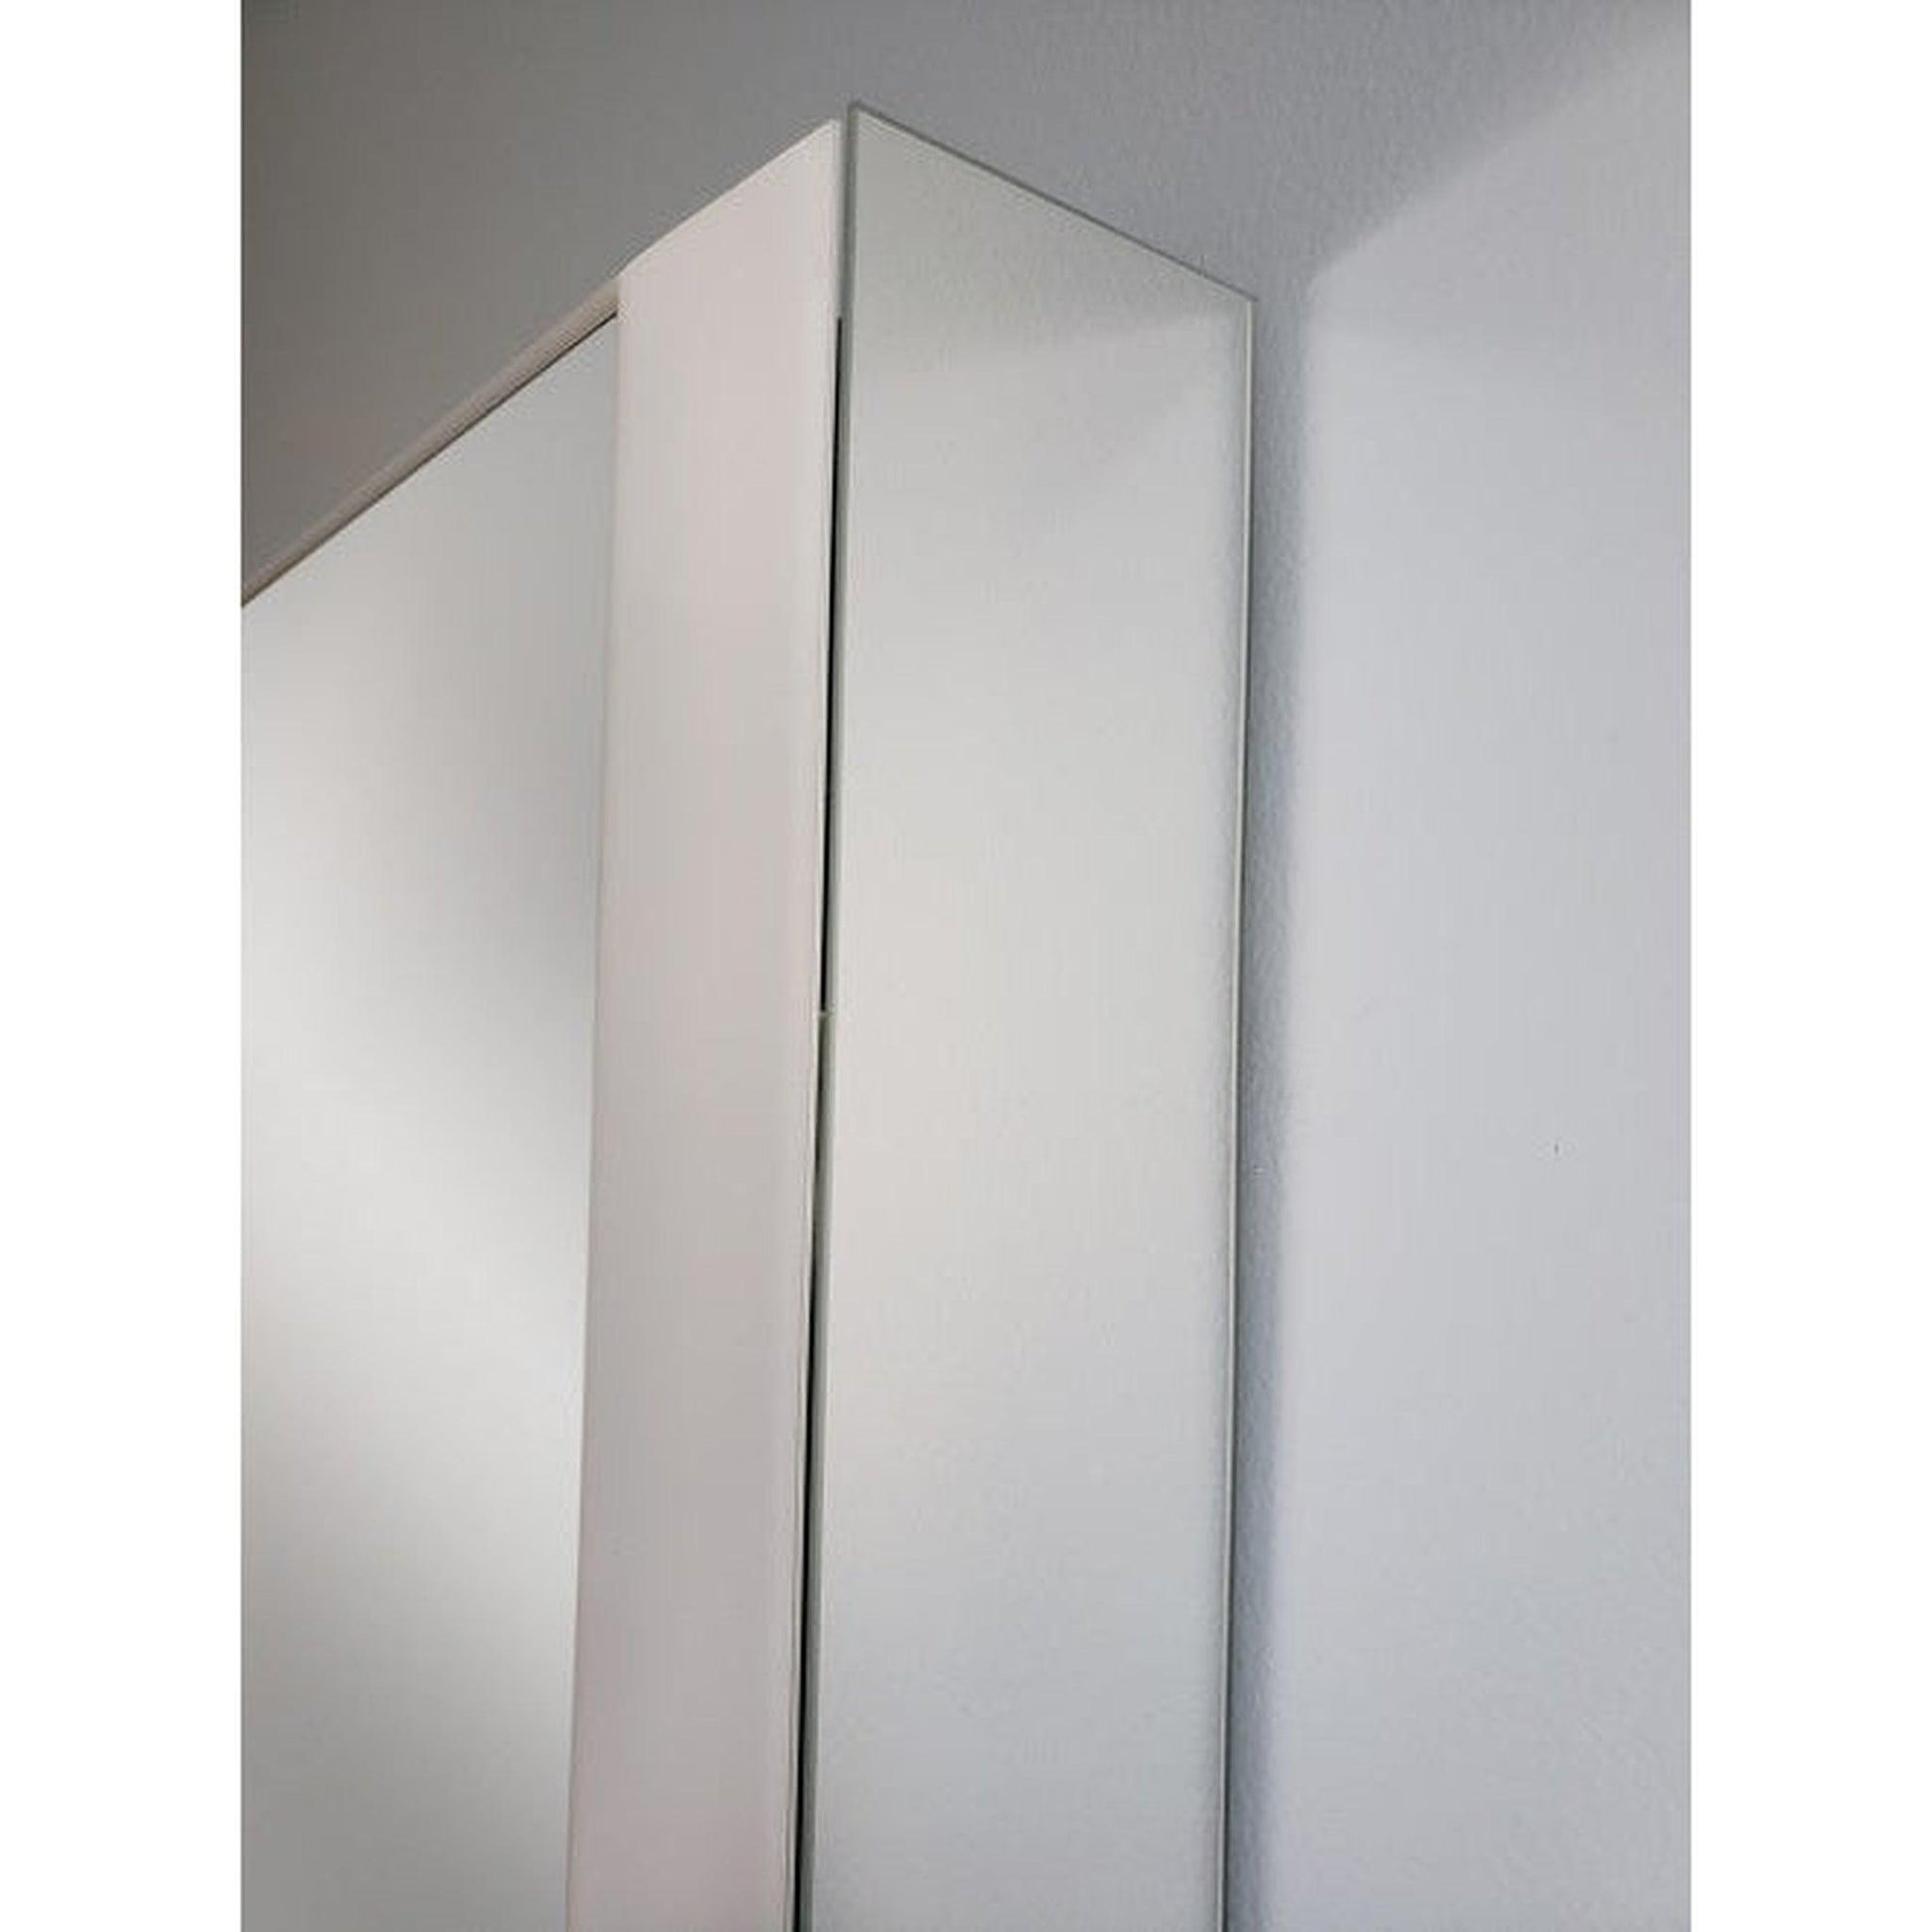 Sidler Quadro 24" x 36" 4000K Single Left Hinged Mirror Door Anodized Aluminum Medicine Cabinet With Night Light Function, Built-in GFCI Outlet and USB port